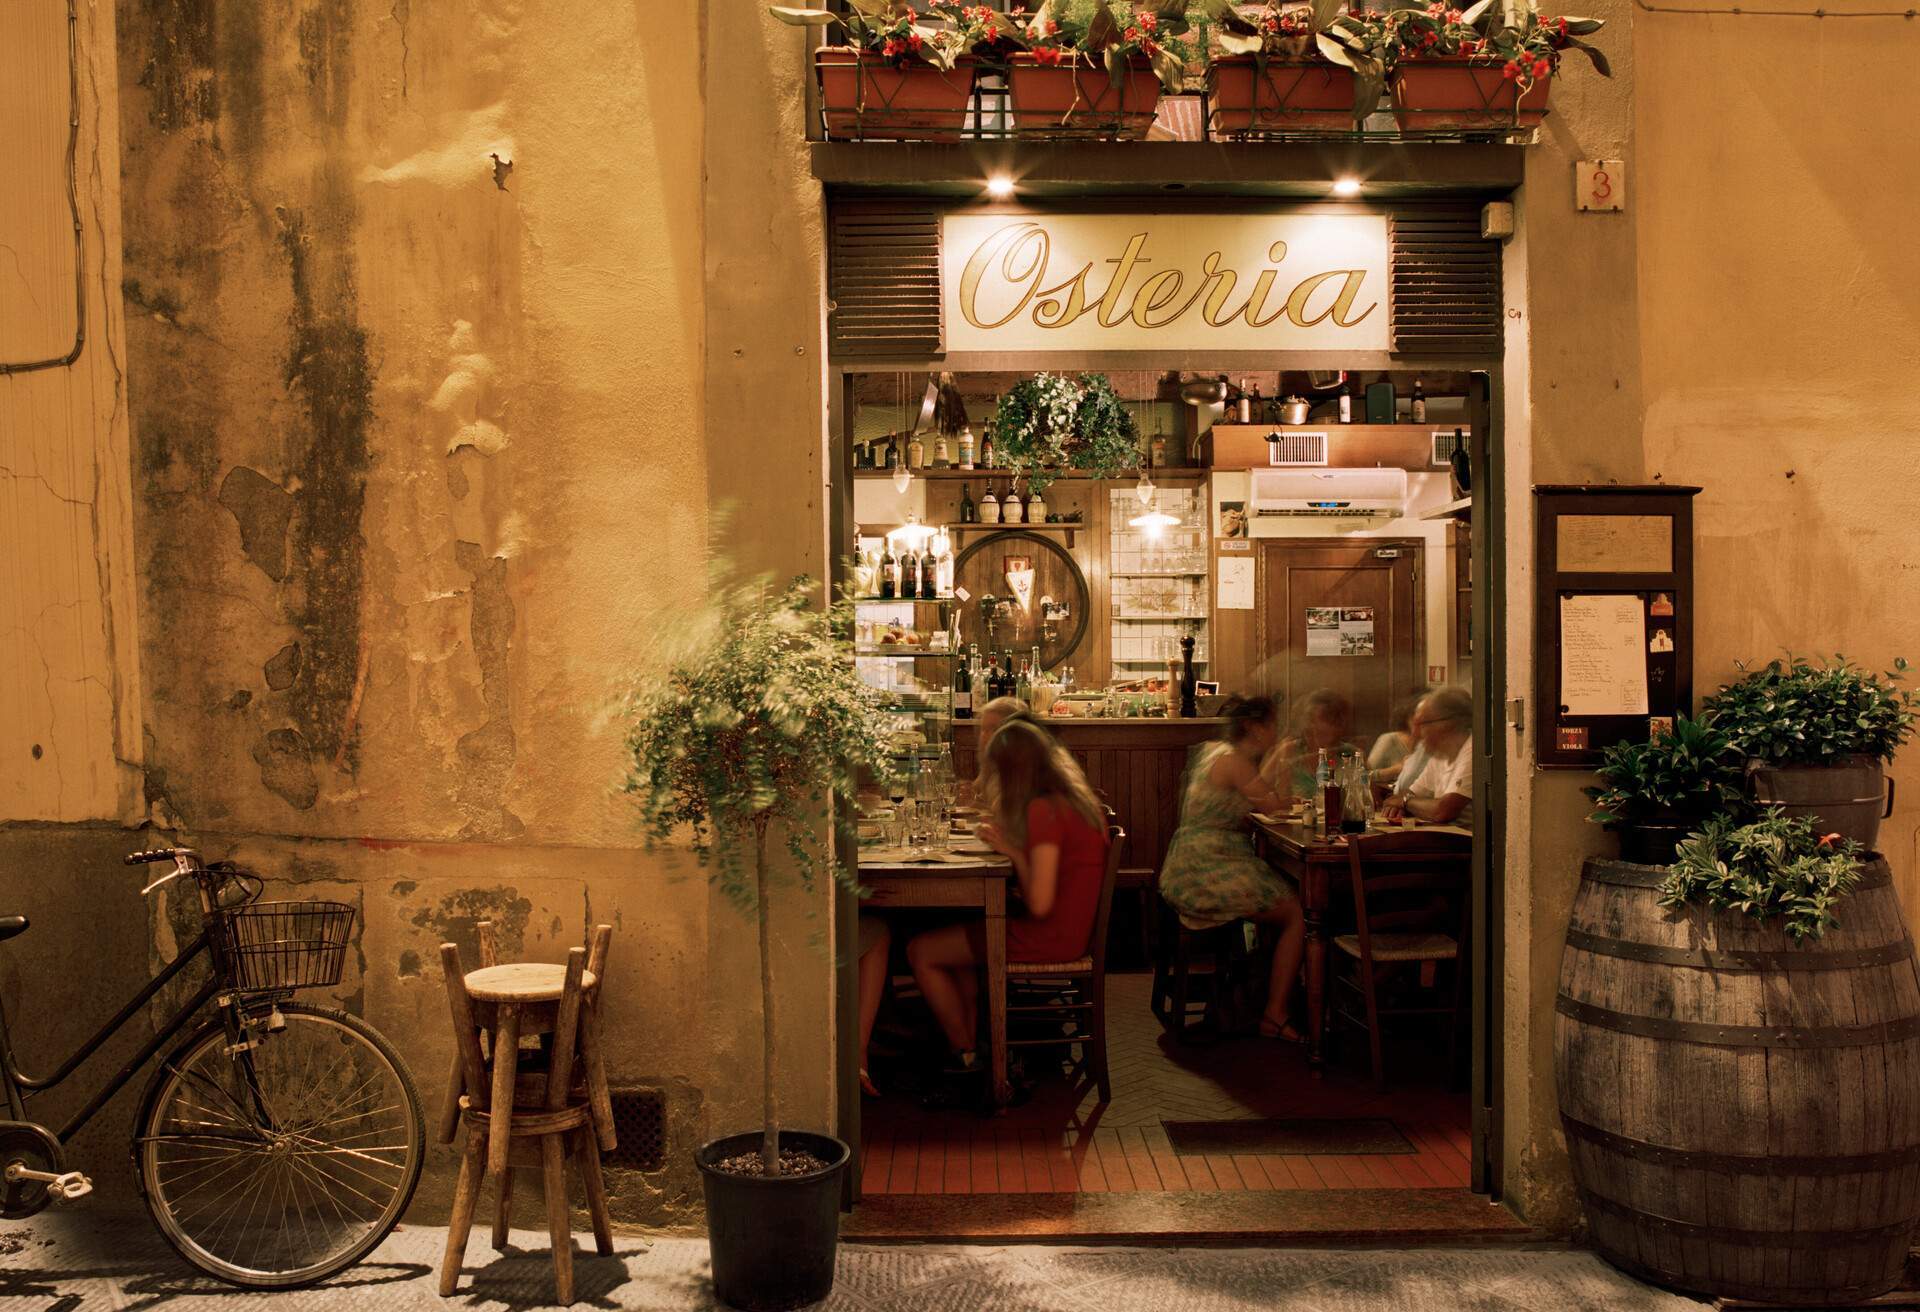 A restaurant entrance with the signage "Osteria" and ornamentals plants beside a parked bicycle.